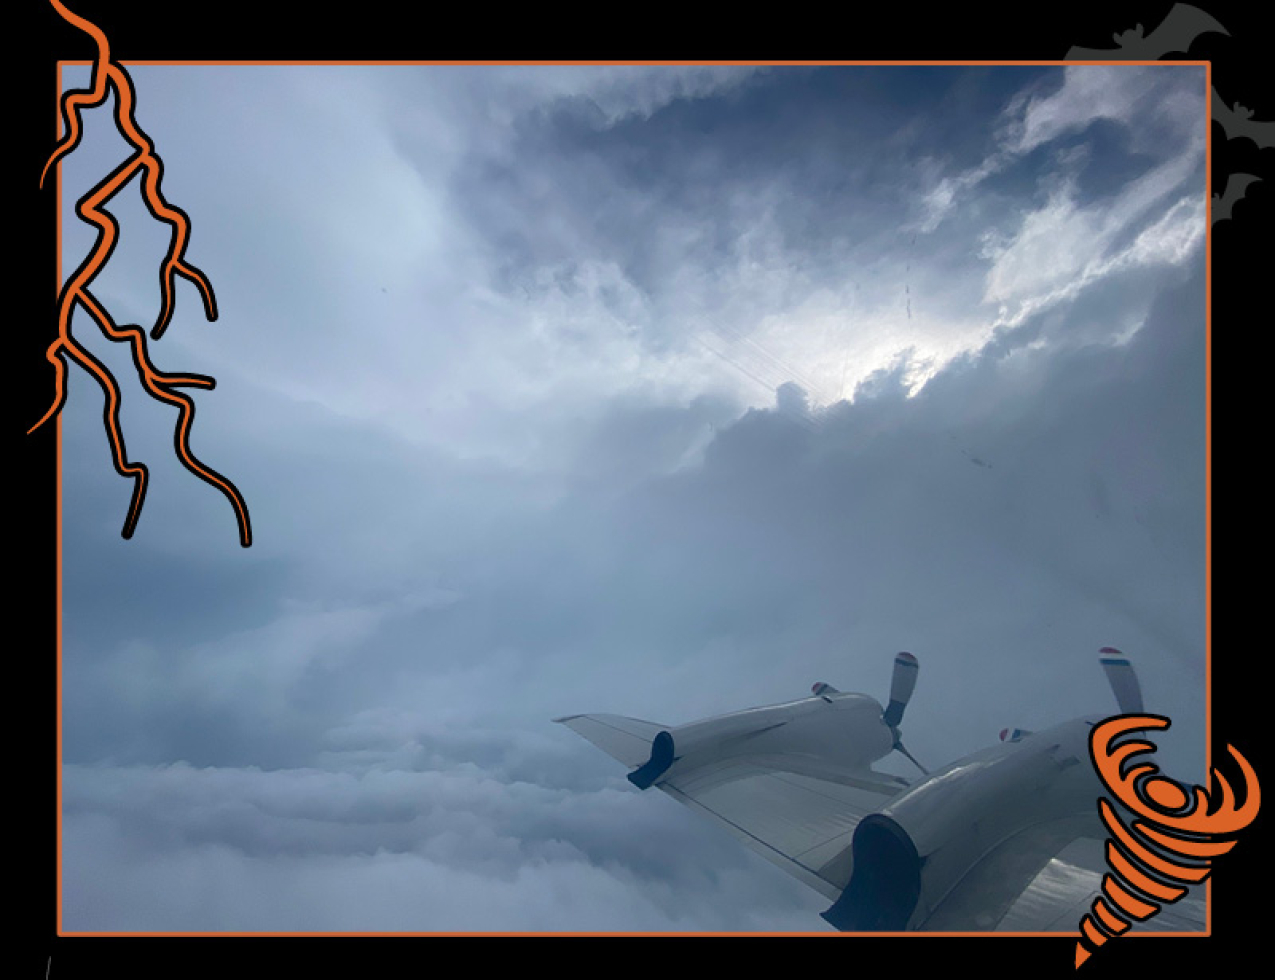 A view of the eye wall of Hurricane Ida from a Hurricane Hunter plane. Border of the photo is black with orange atmospheric graphics of a lightning bolt and a tornado. Text: Hurricane Hunter footage, #NOAASpookyScience with NOAA logo.